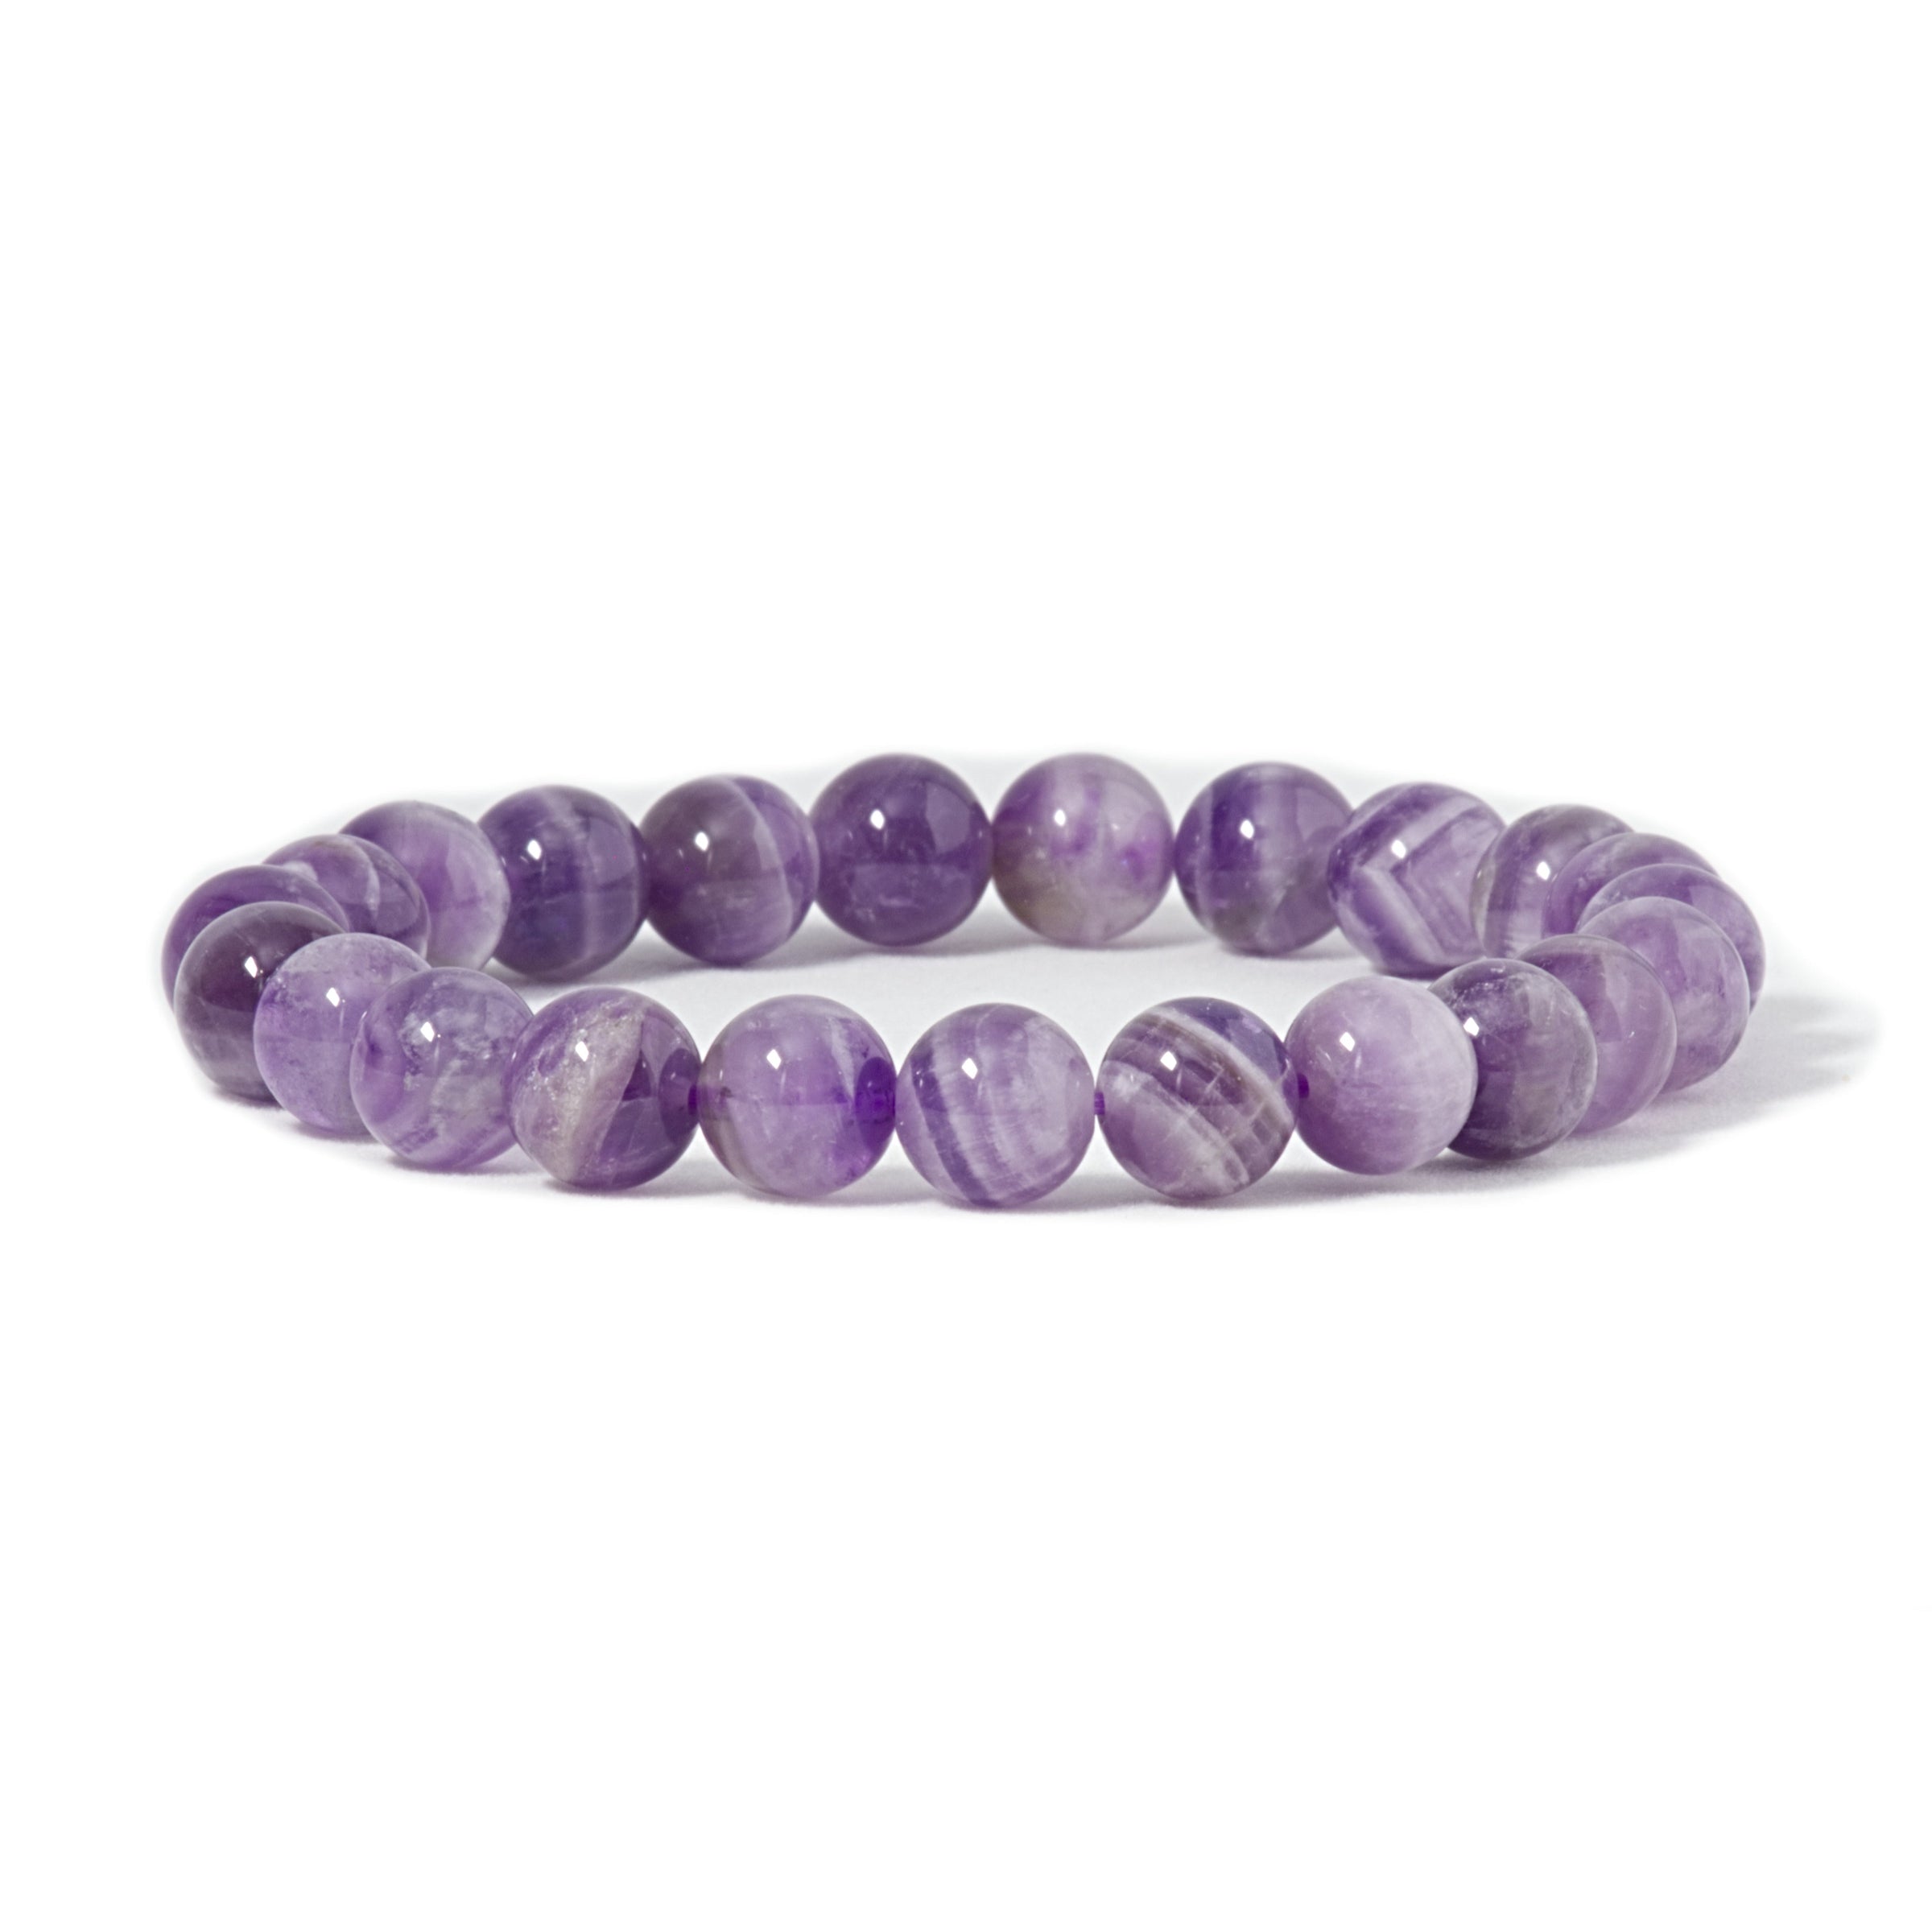 Cherry Tree Collection | Stretch Bracelet | 8mm Beads (Dogtooth Amethyst)